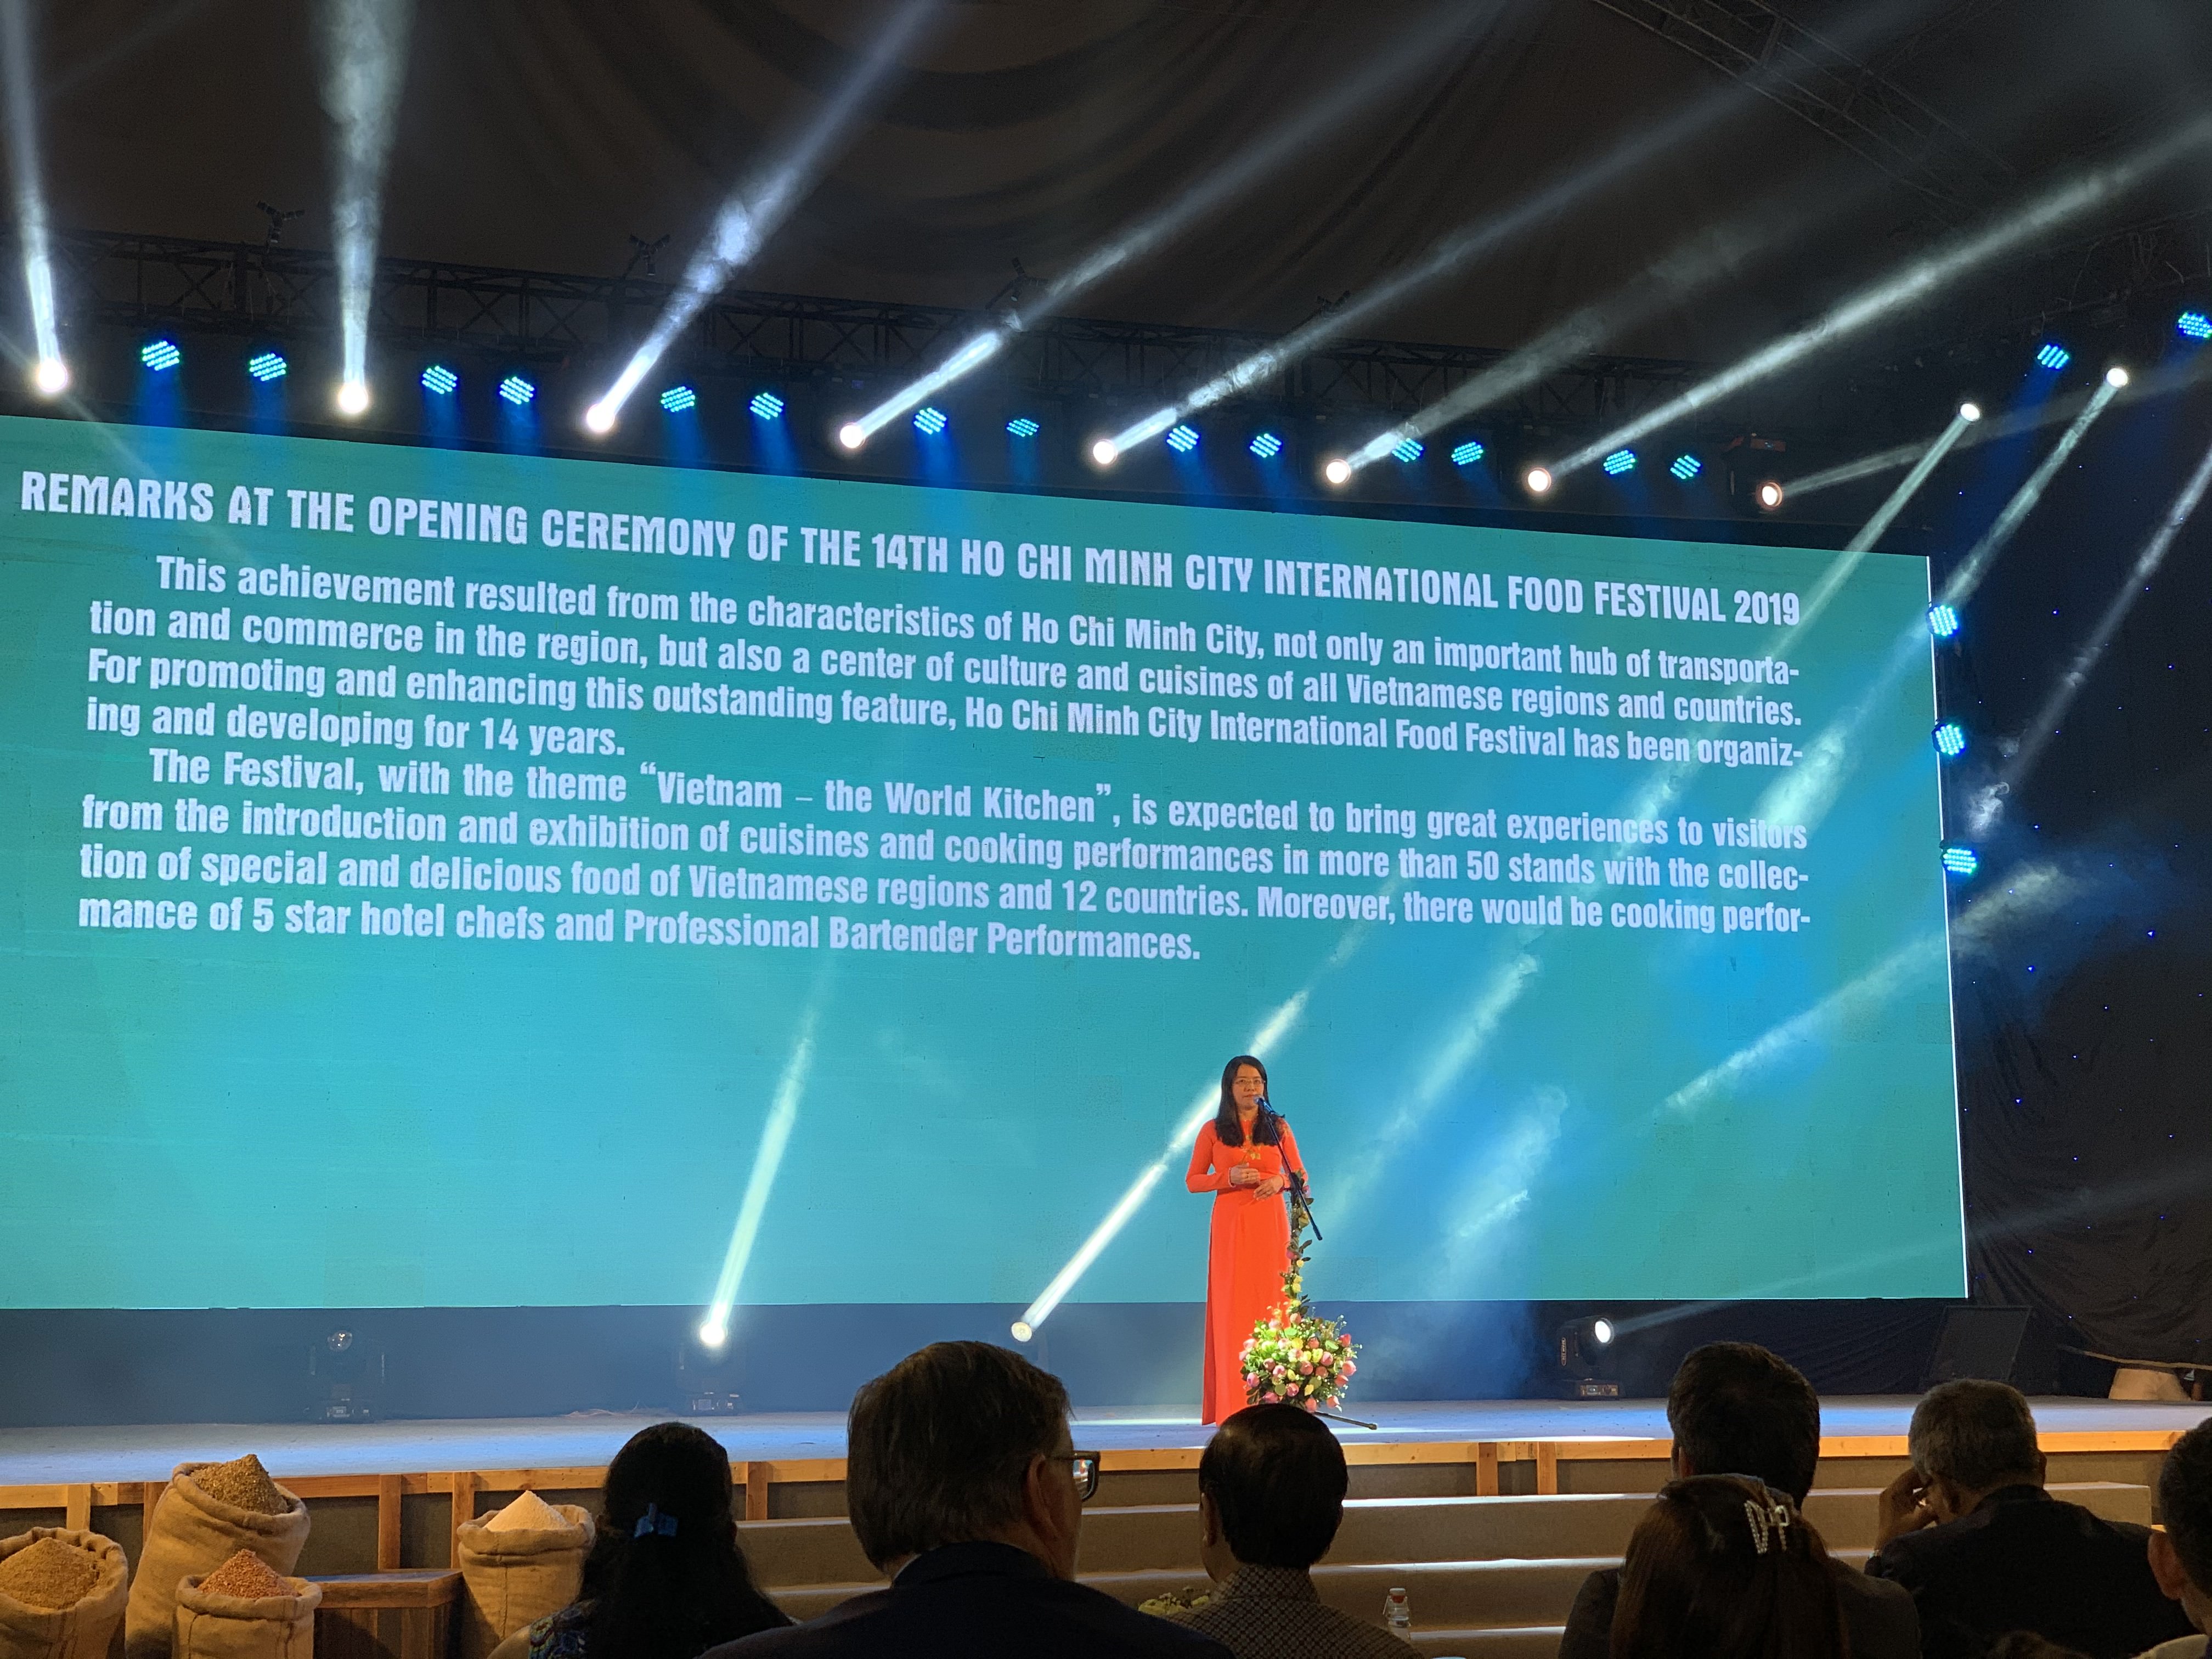 Nguyen Thi Anh Hoa, deputy director of the Ho Chi Minh City Department of Tourism, speaks at the opening ceremony of the international food festival held at the Youth Cultural House in District 1, Ho Chi Minh City, November 14, 2019. Photo: Bao Anh / Tuoi Tre News